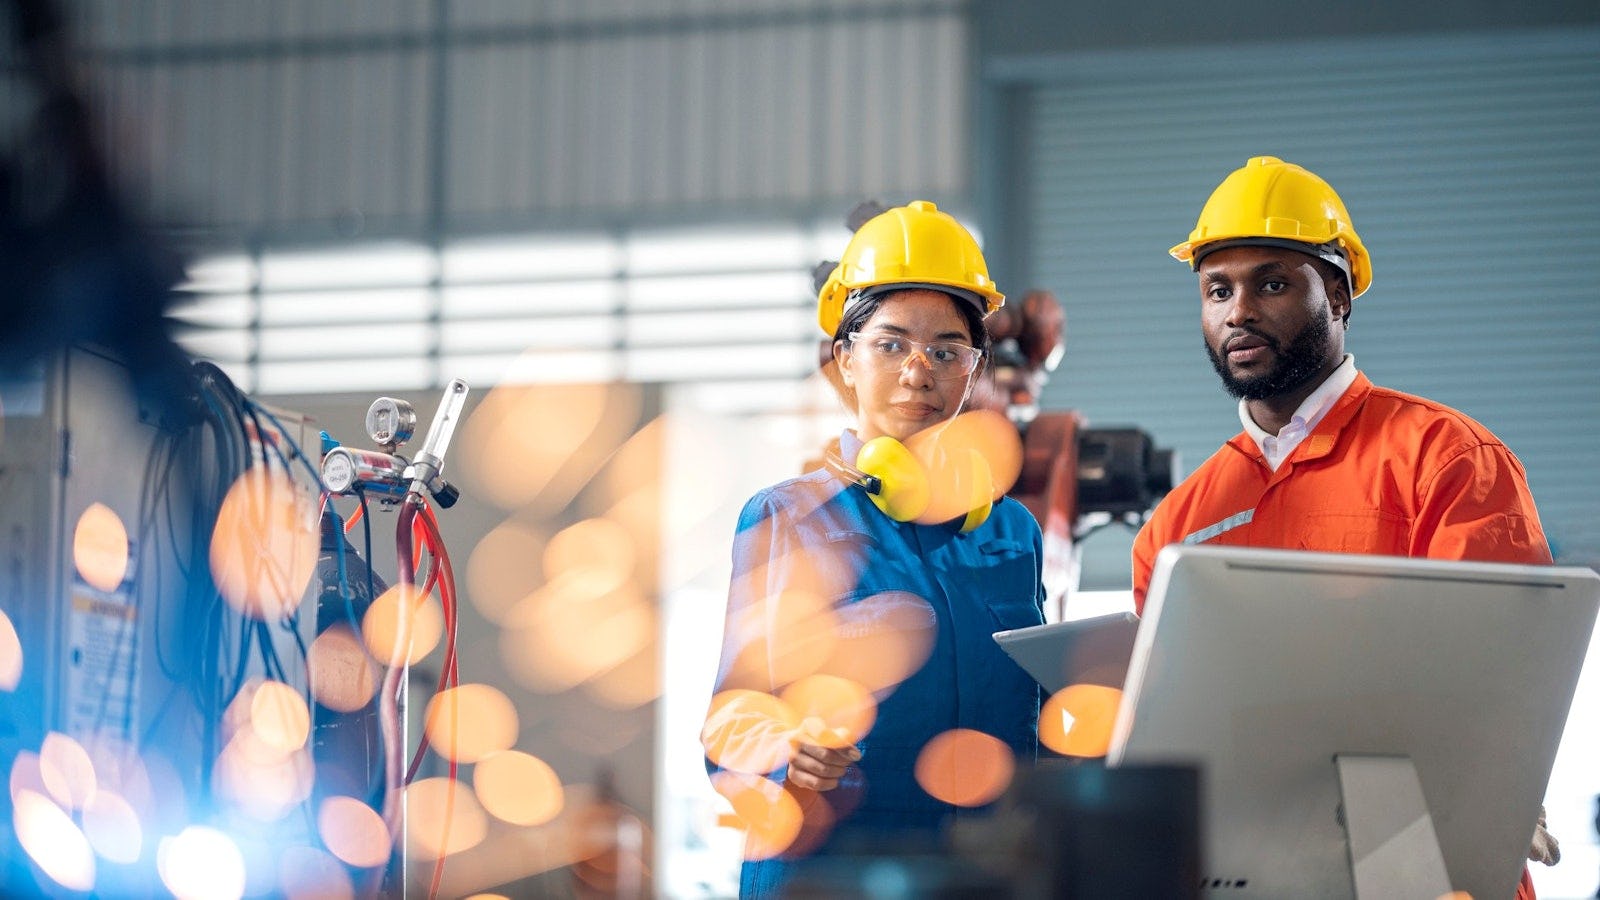 Microsoft Dynamics 365 for manufacturing